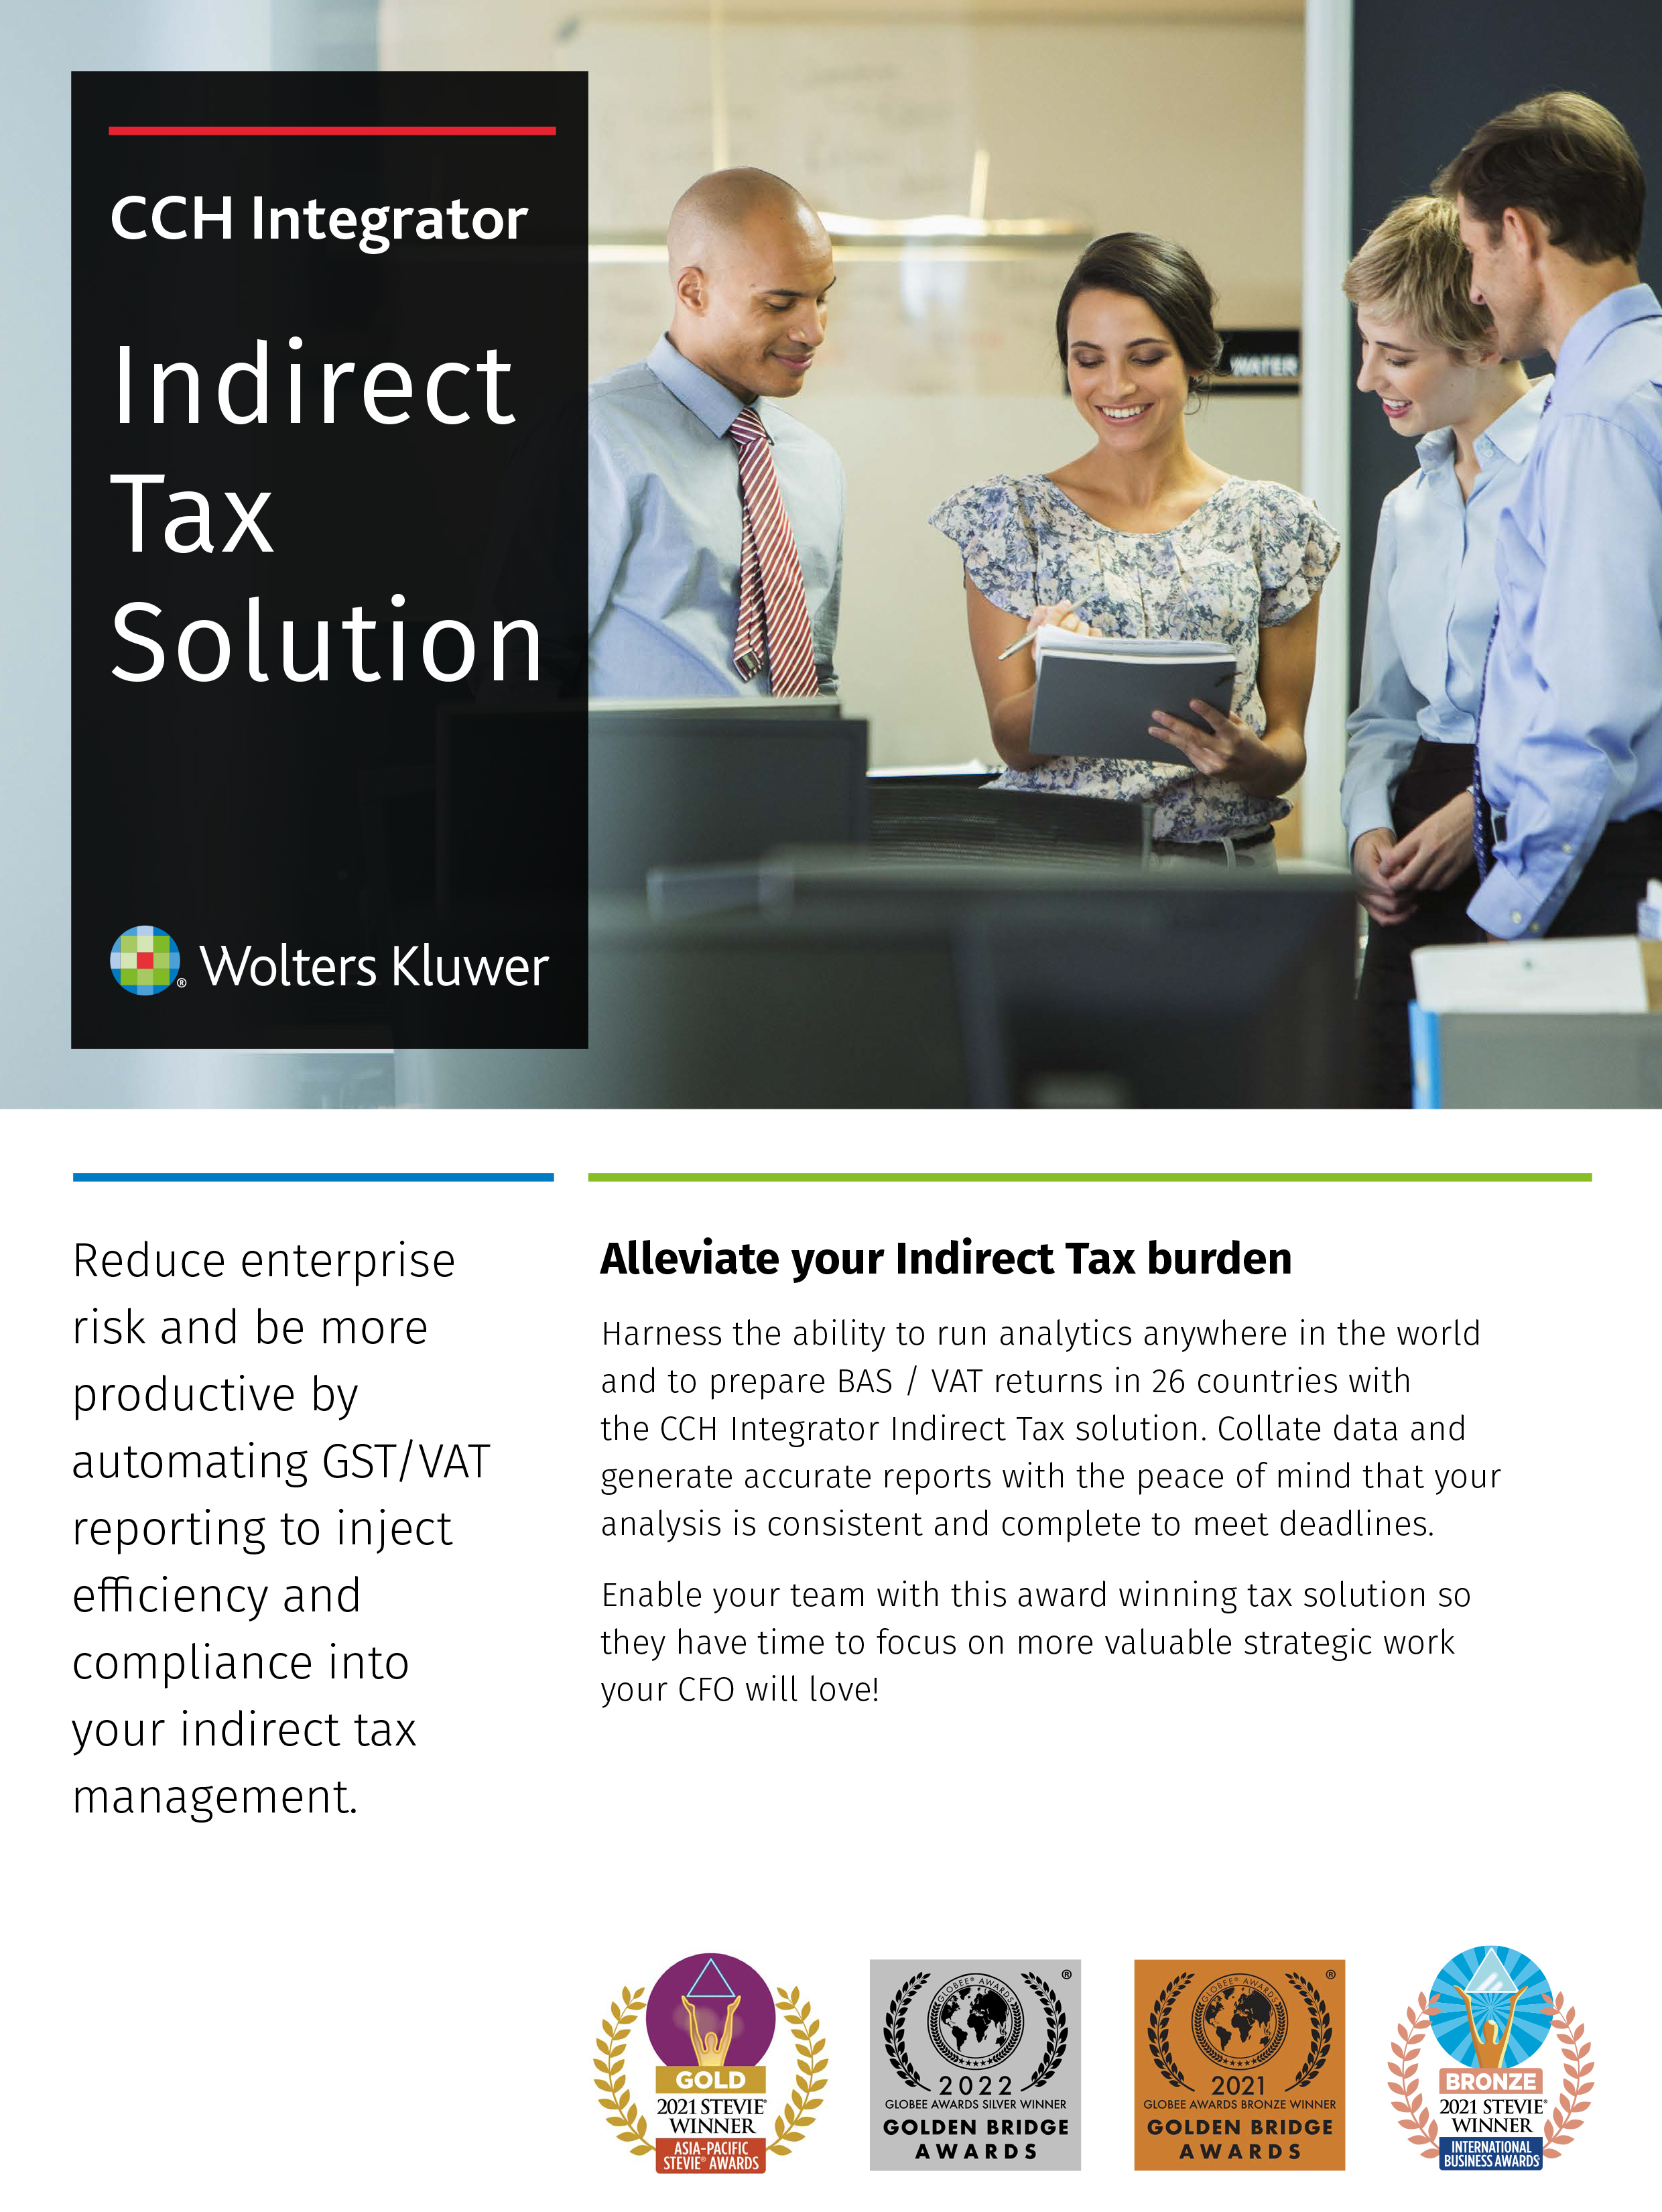 CCH Integrator Indirect Tax fact sheet cover